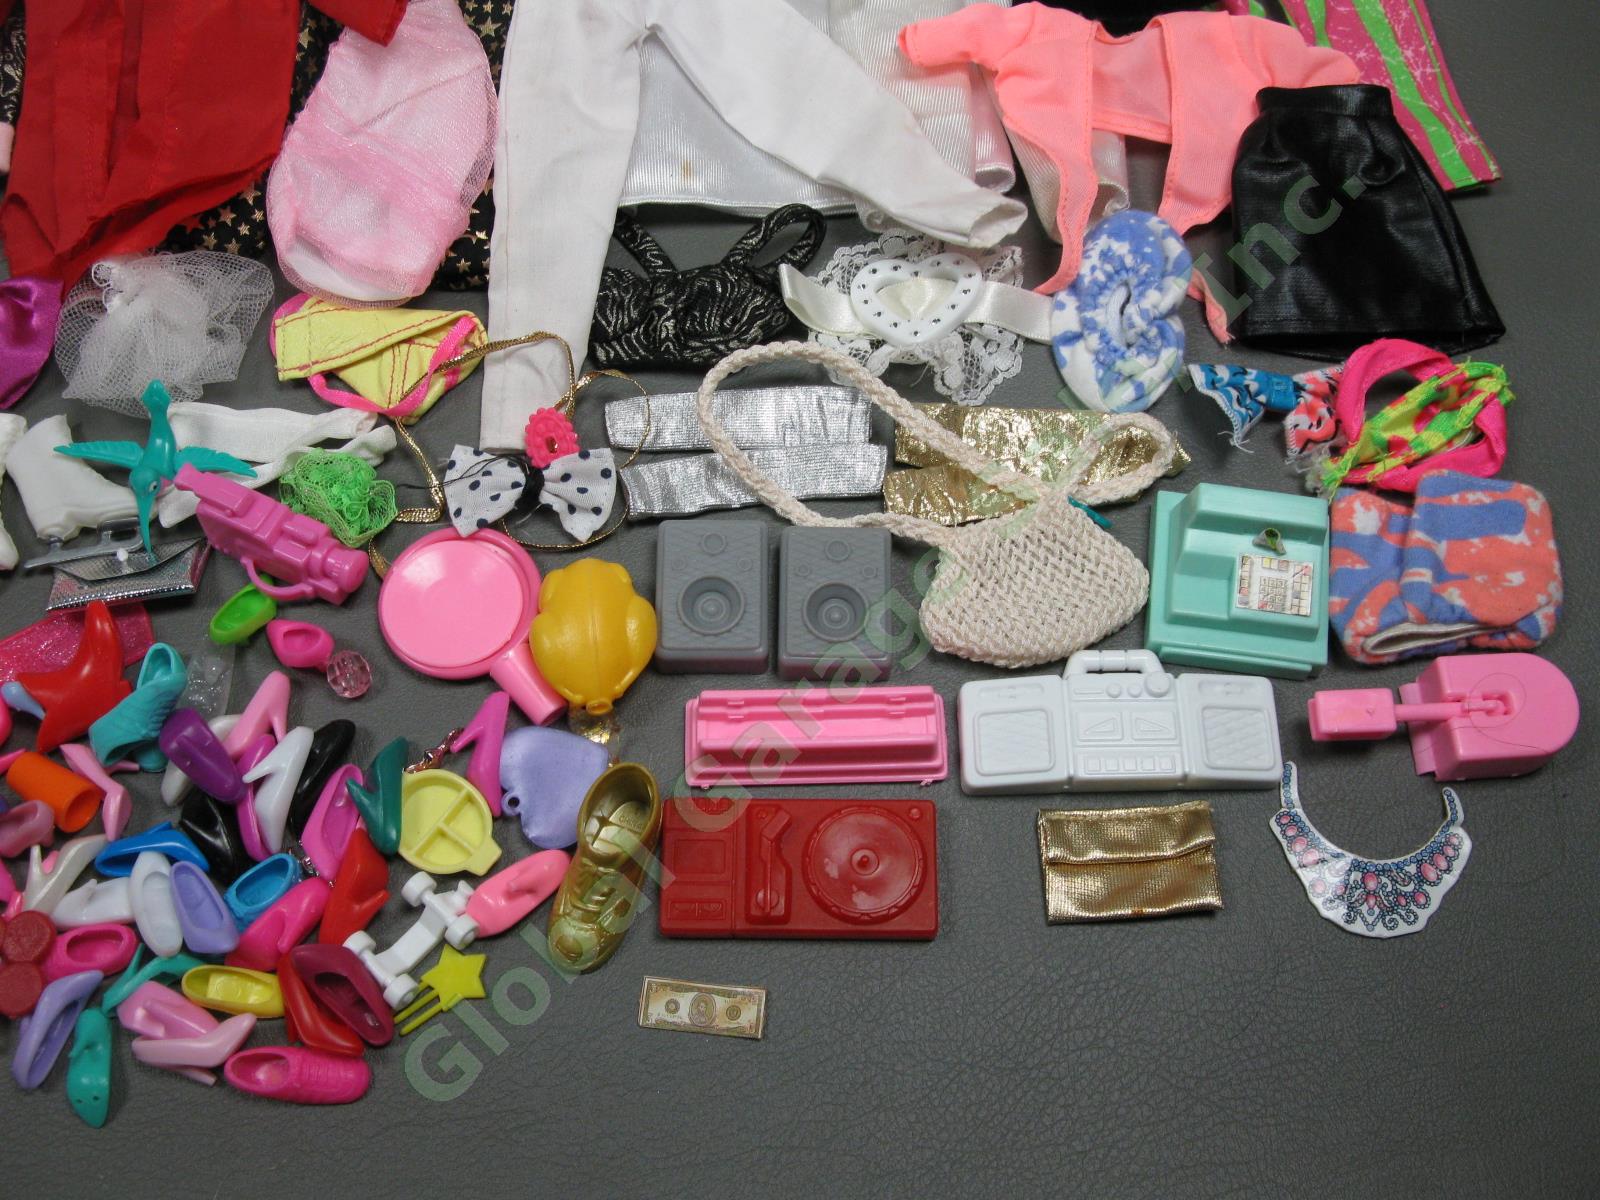 HUGE 29 1970s-1990s Barbie Doll Lot Horse Clothes Accessories Disney Collection 46